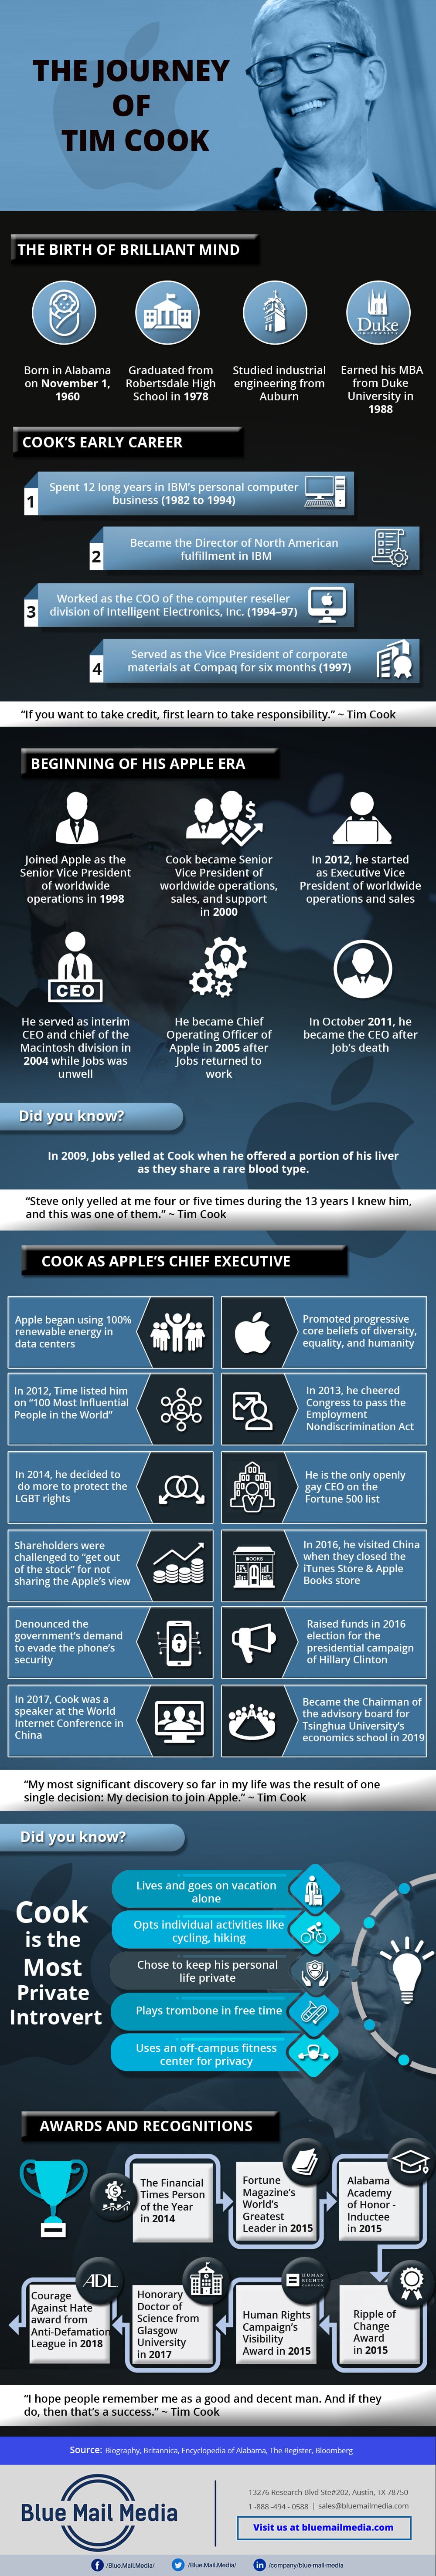 The Journey of Tim Cook